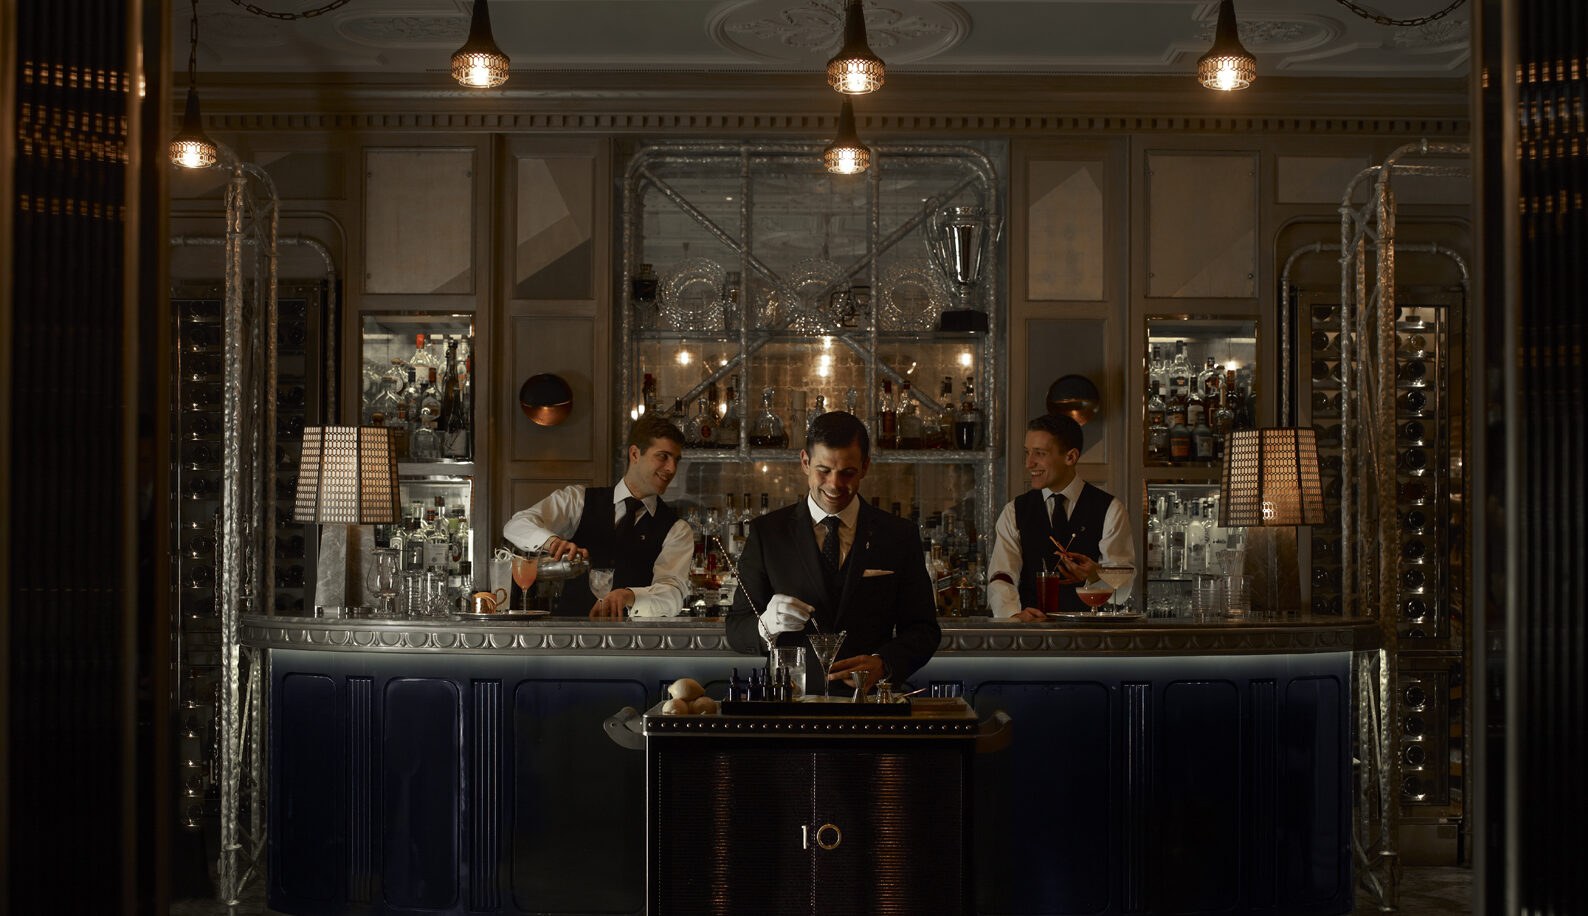 The Connaught Bar